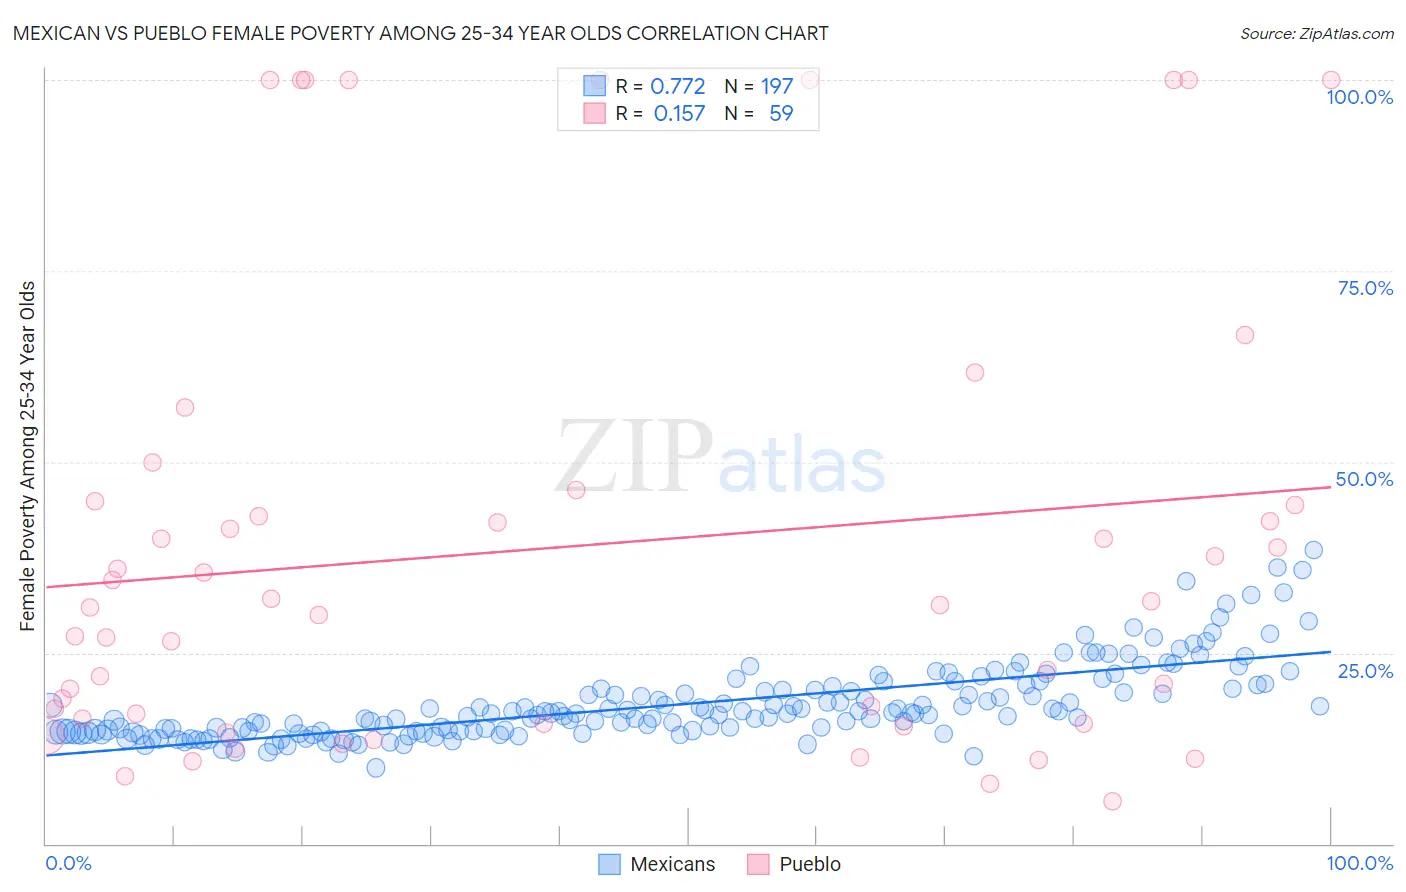 Mexican vs Pueblo Female Poverty Among 25-34 Year Olds